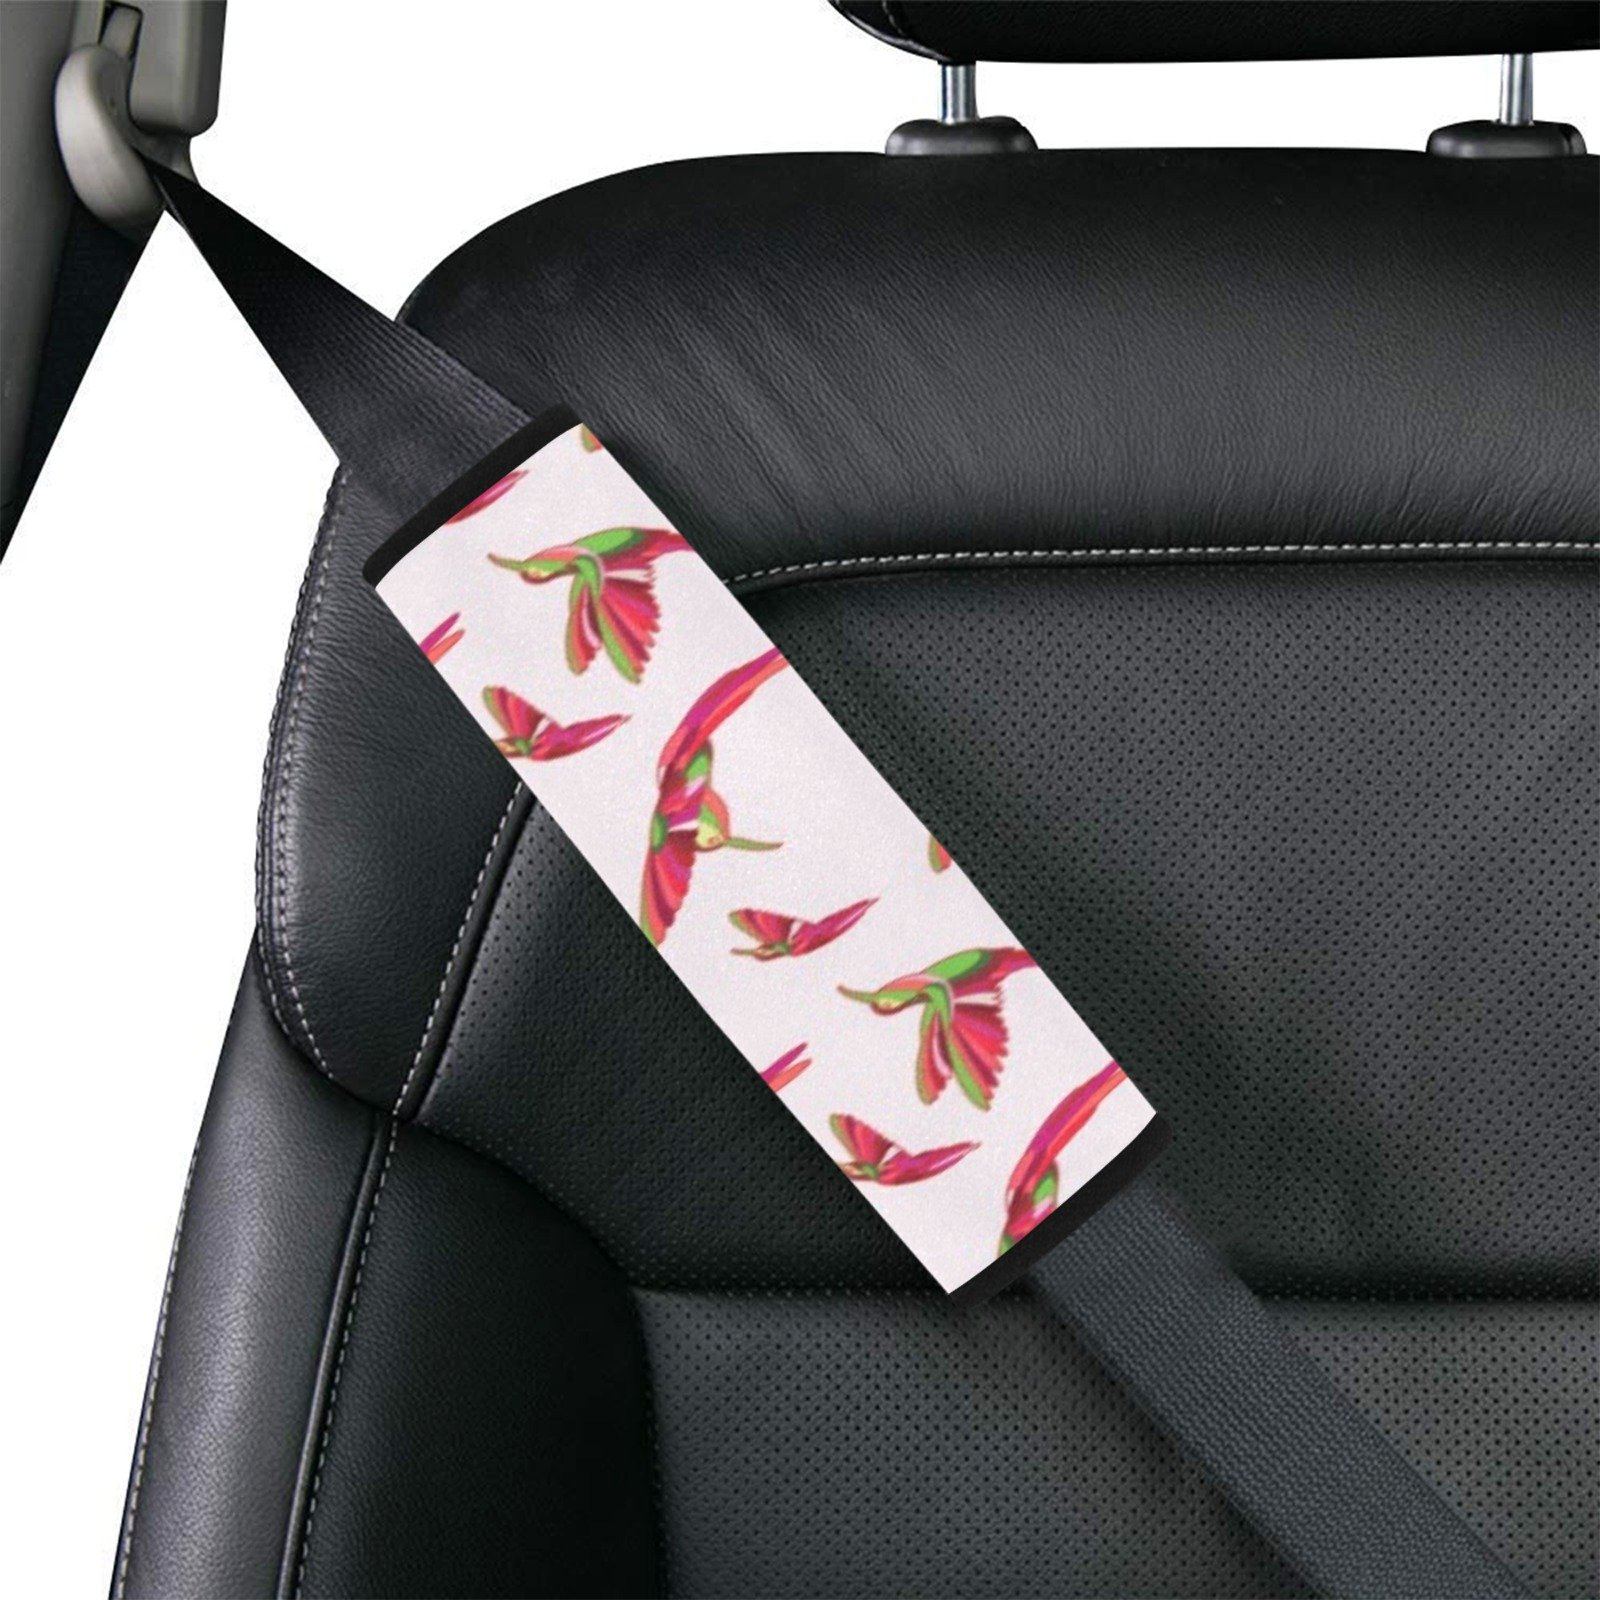 Red Swift Colourful Car Seat Belt Cover 7''x12.6'' (Pack of 2) Car Seat Belt Cover 7x12.6 (Pack of 2) e-joyer 